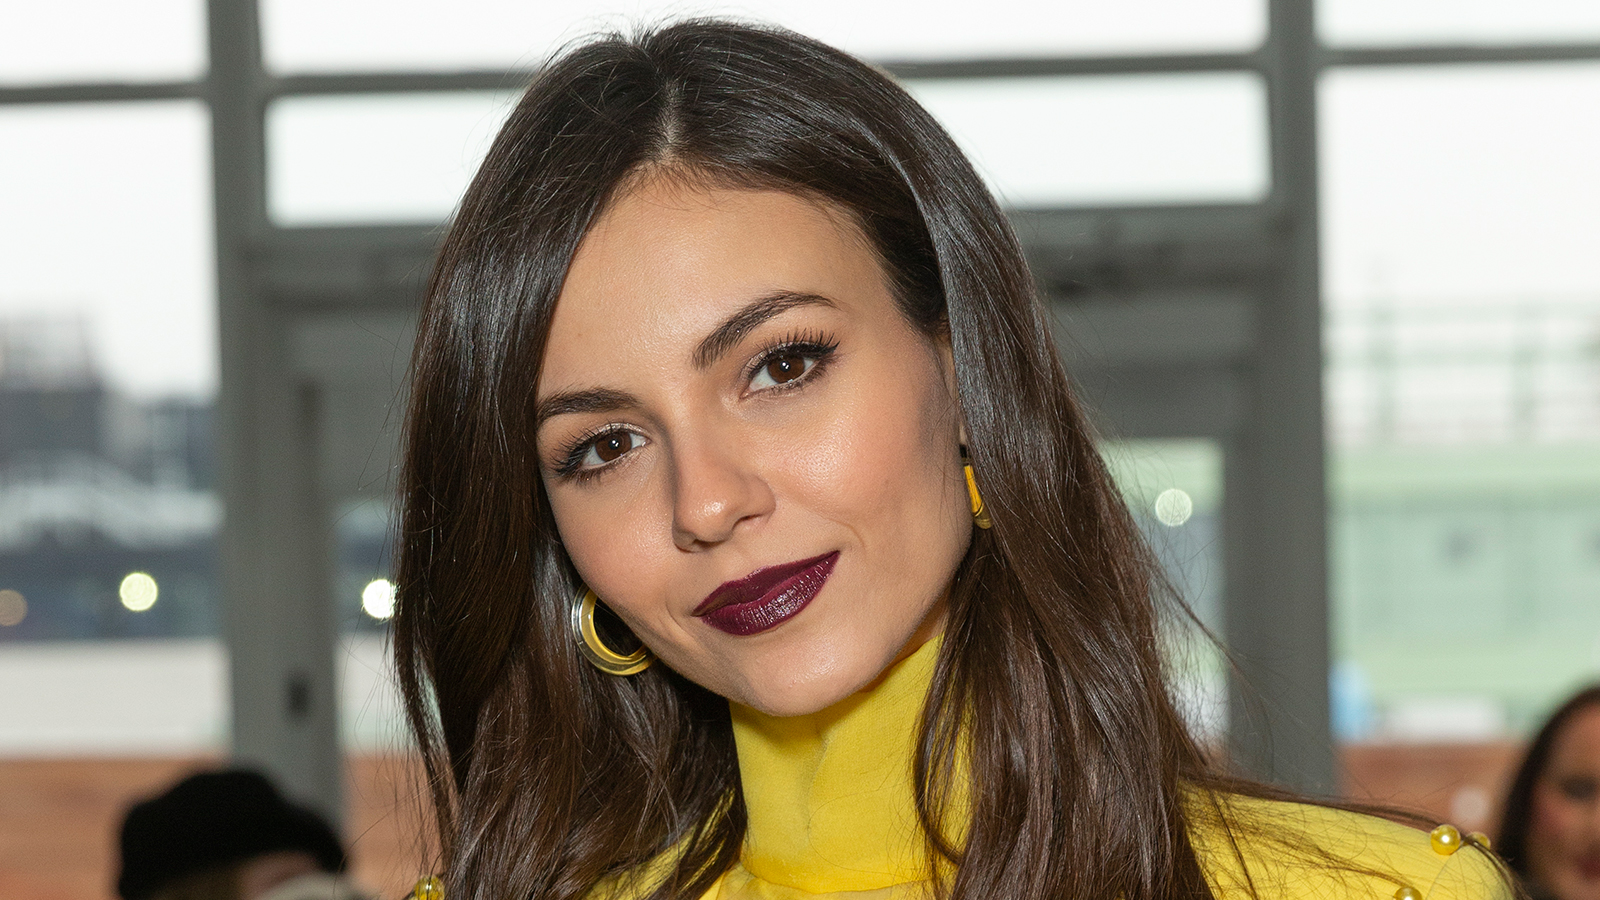 What Victoria Justice Wore